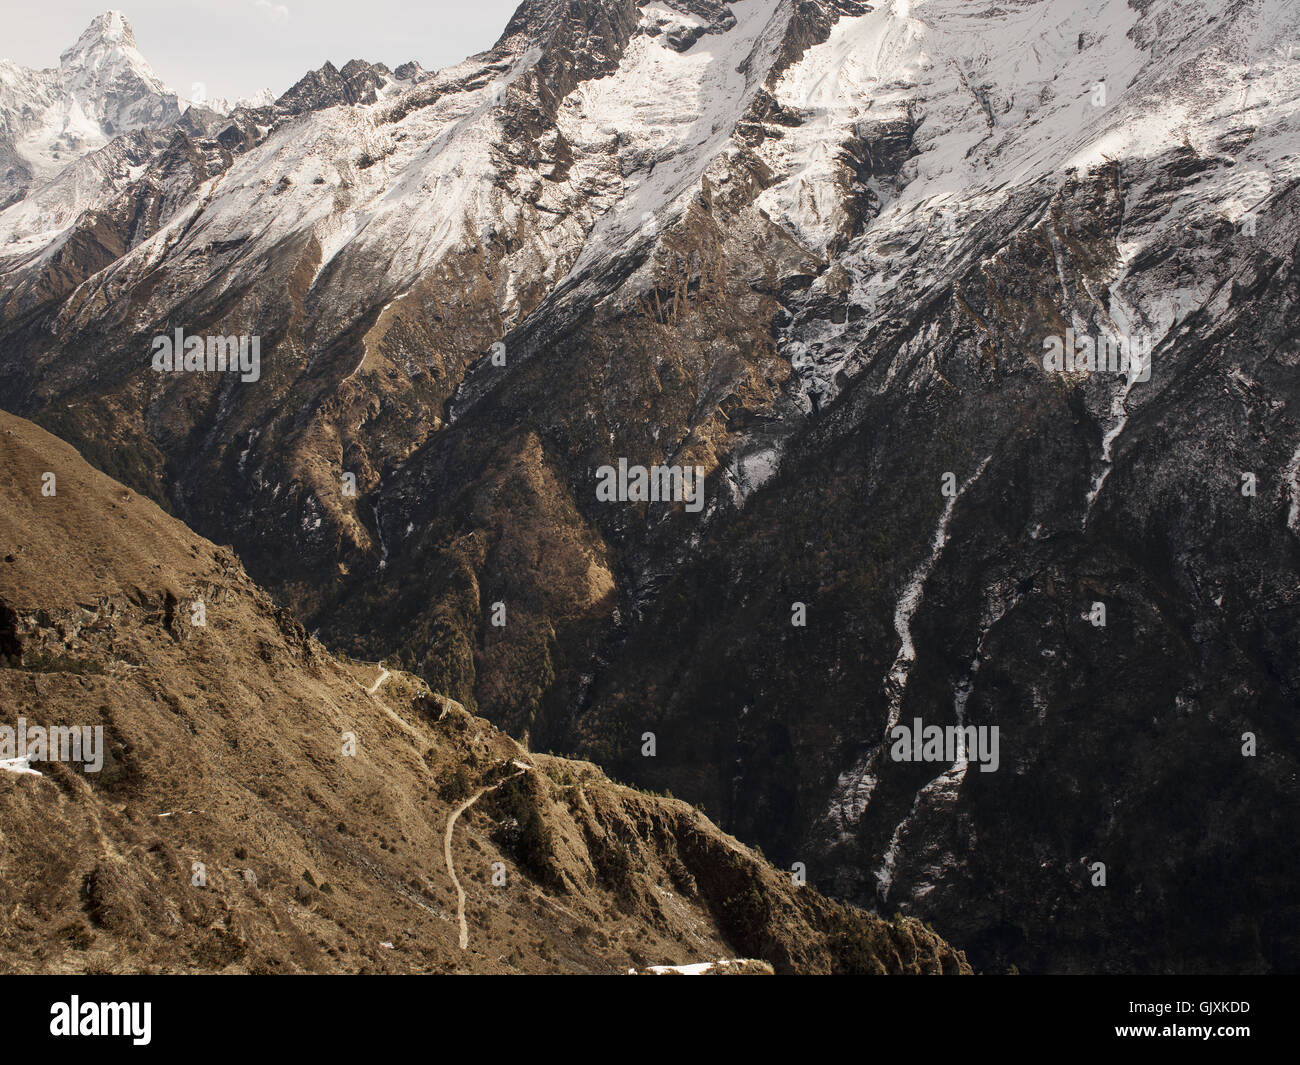 A view of part of Everest Base Camp's trail in Nepal's Himalayas Stock Photo